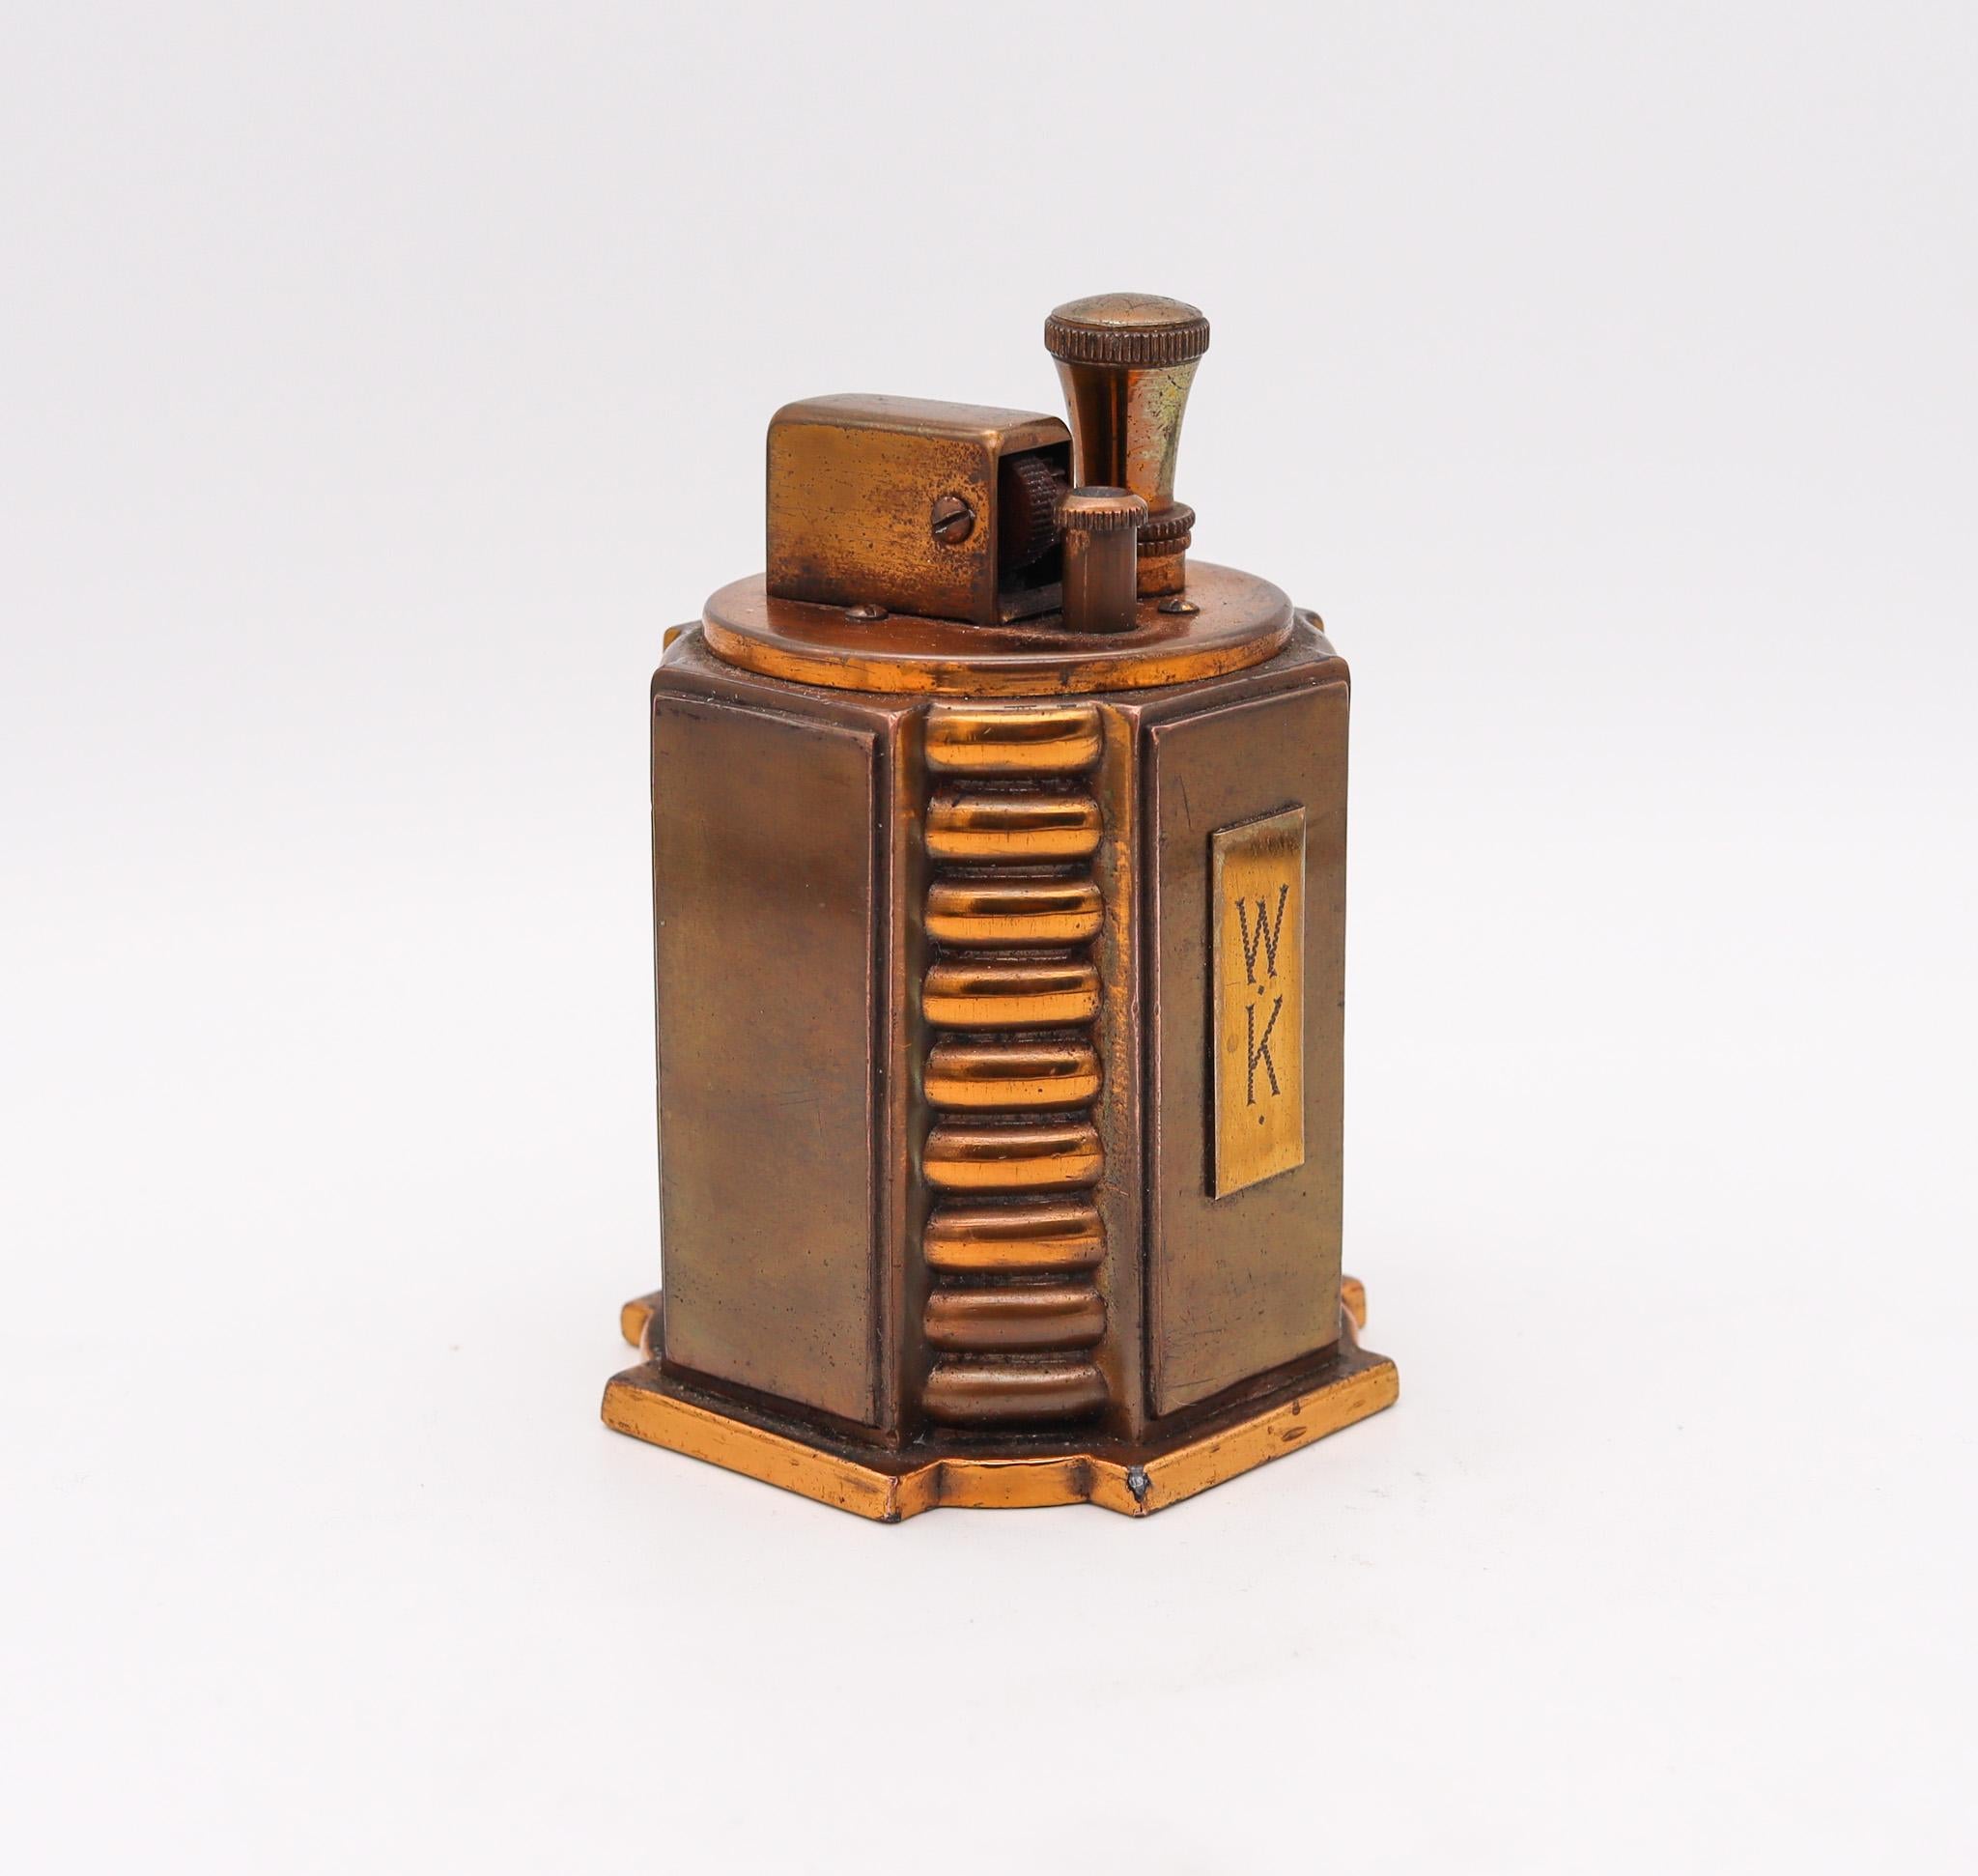 A bronze Tourette desk lighter designed by Ronson.

Very rare desk table Touch-Tip lighter, created in Newark New Jersey by Ronson, at The Art Metal Works Co. during the art deco period, back in the 1936. This is a very unusual Turret lighter